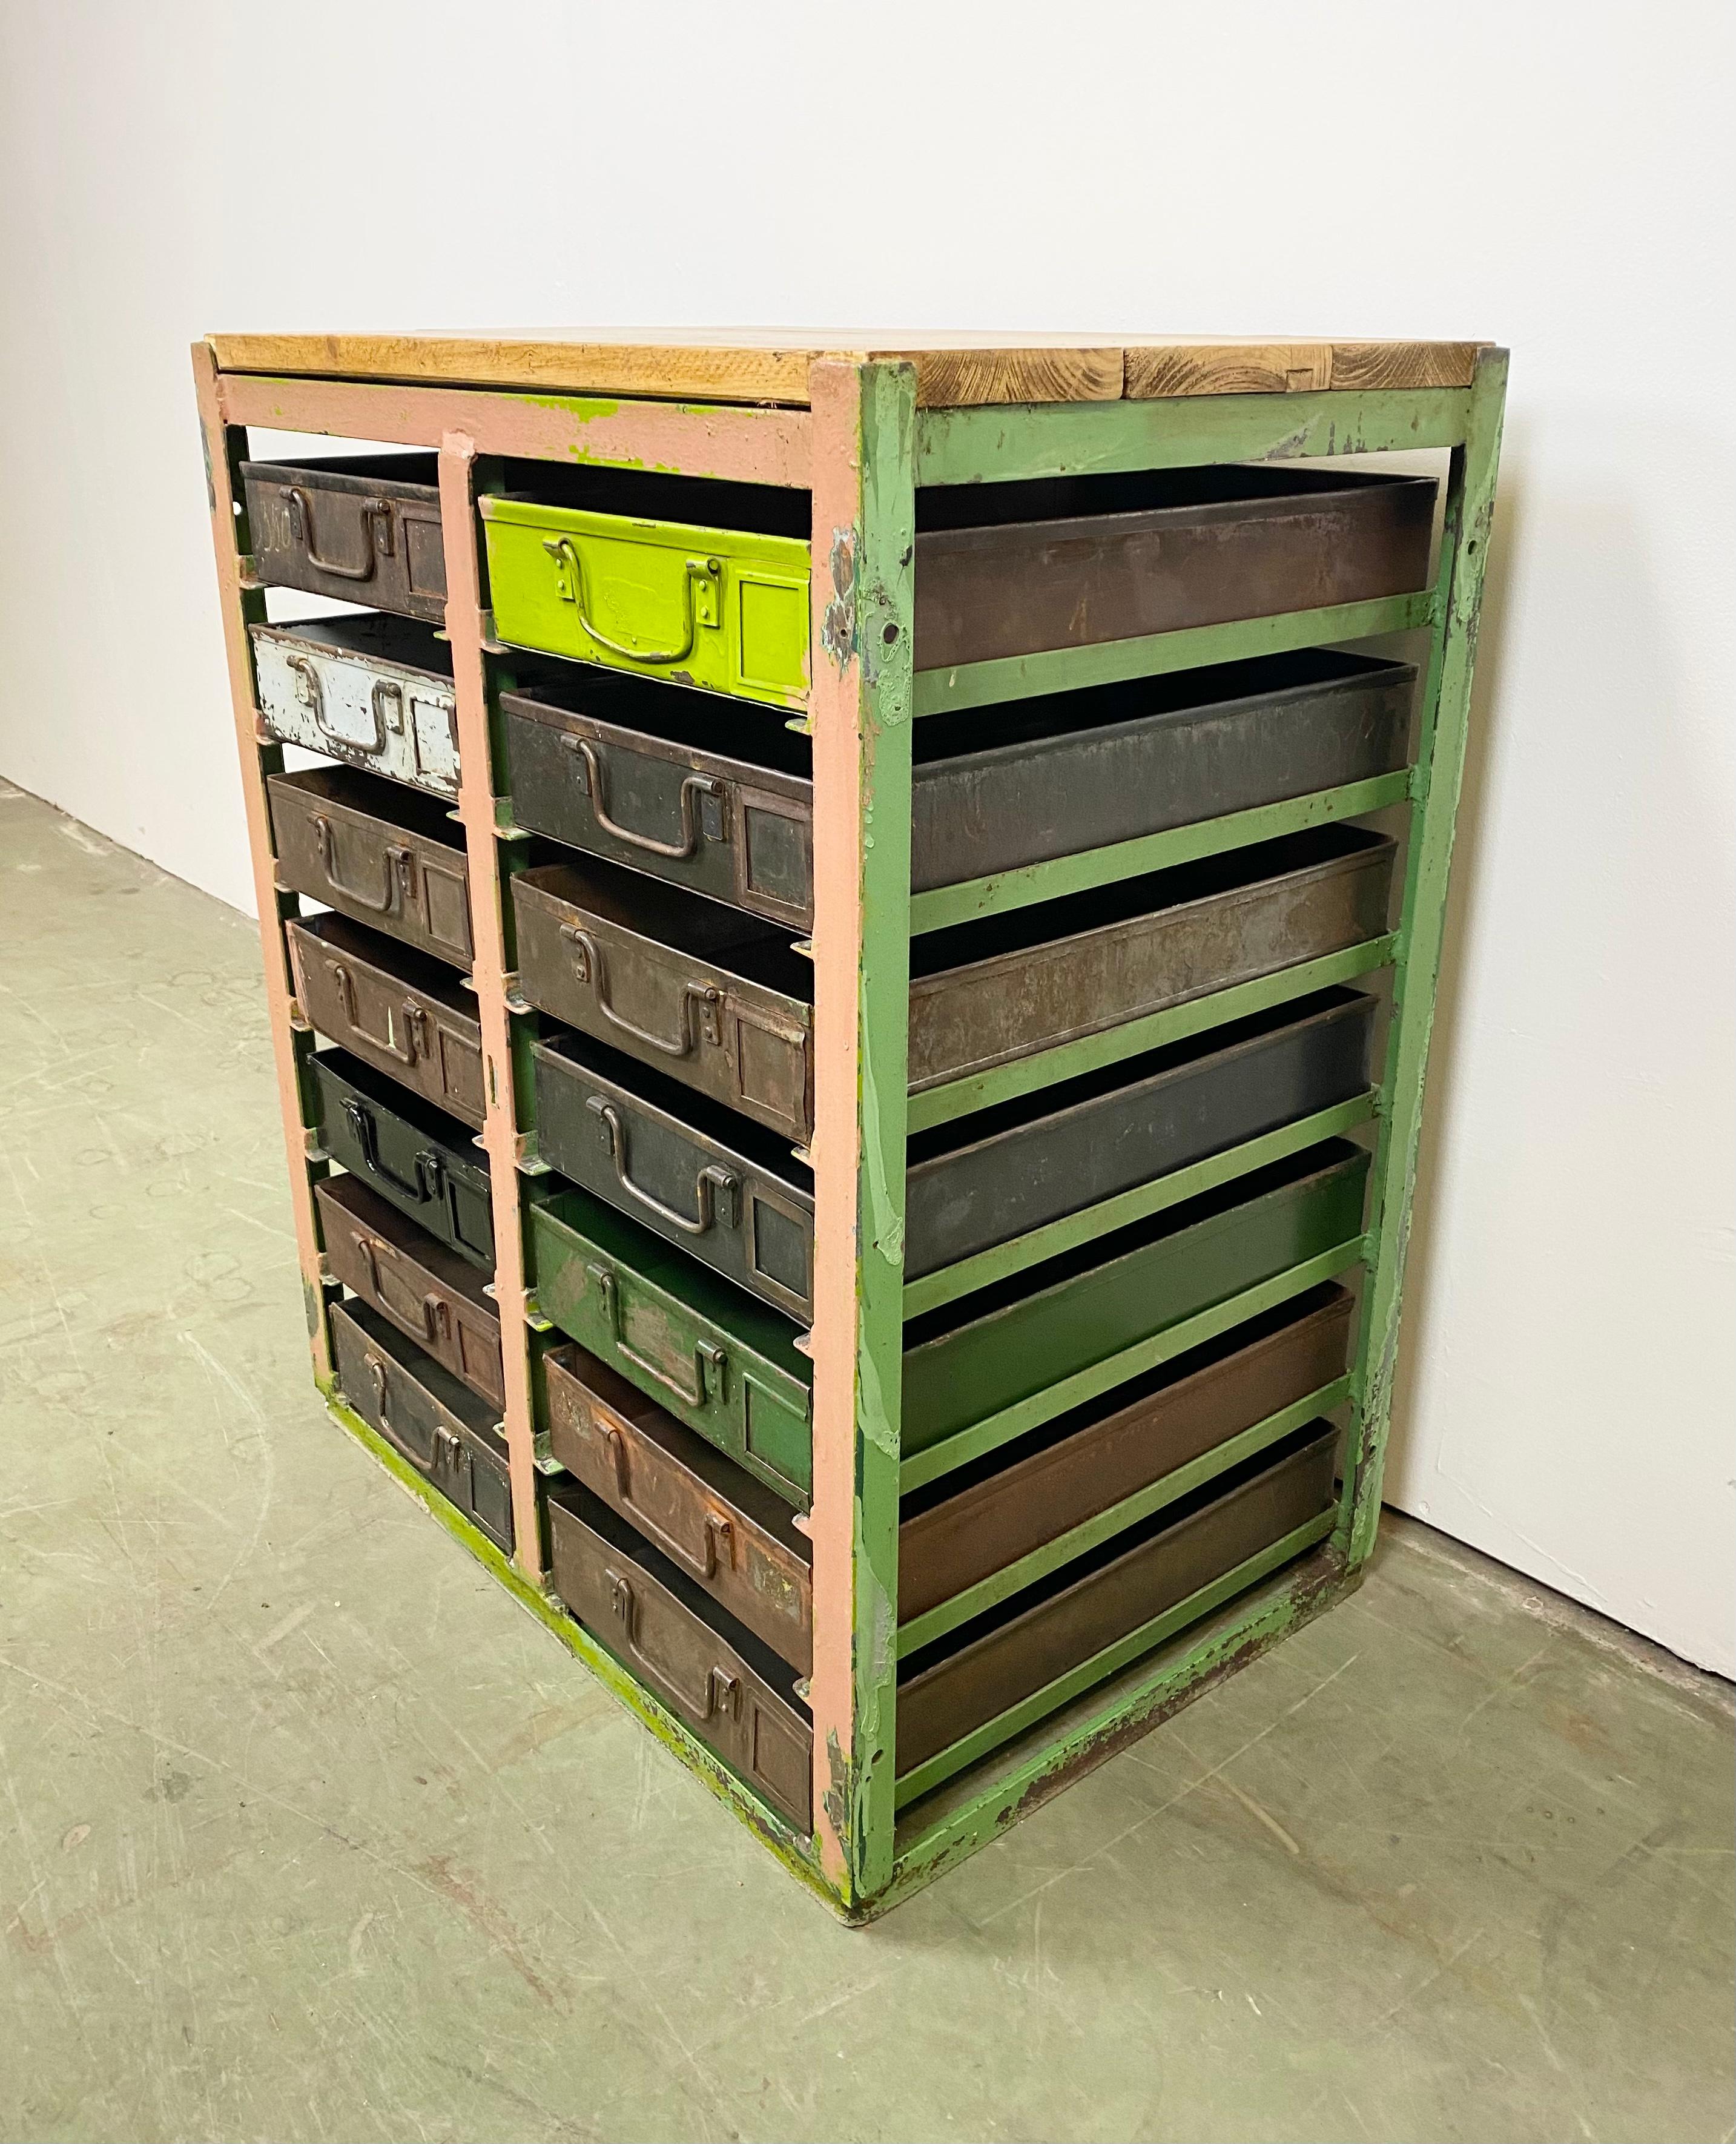 This vintage Industrial iron chest of drawers was made during the 1950s. It features an iron construction, old wooden top and 14 metal drawers. Additional dimensions:
Drawer dimensions
- Width 28 cm, depth 44 cm, height 8 cm
- Weight: 57 kg.